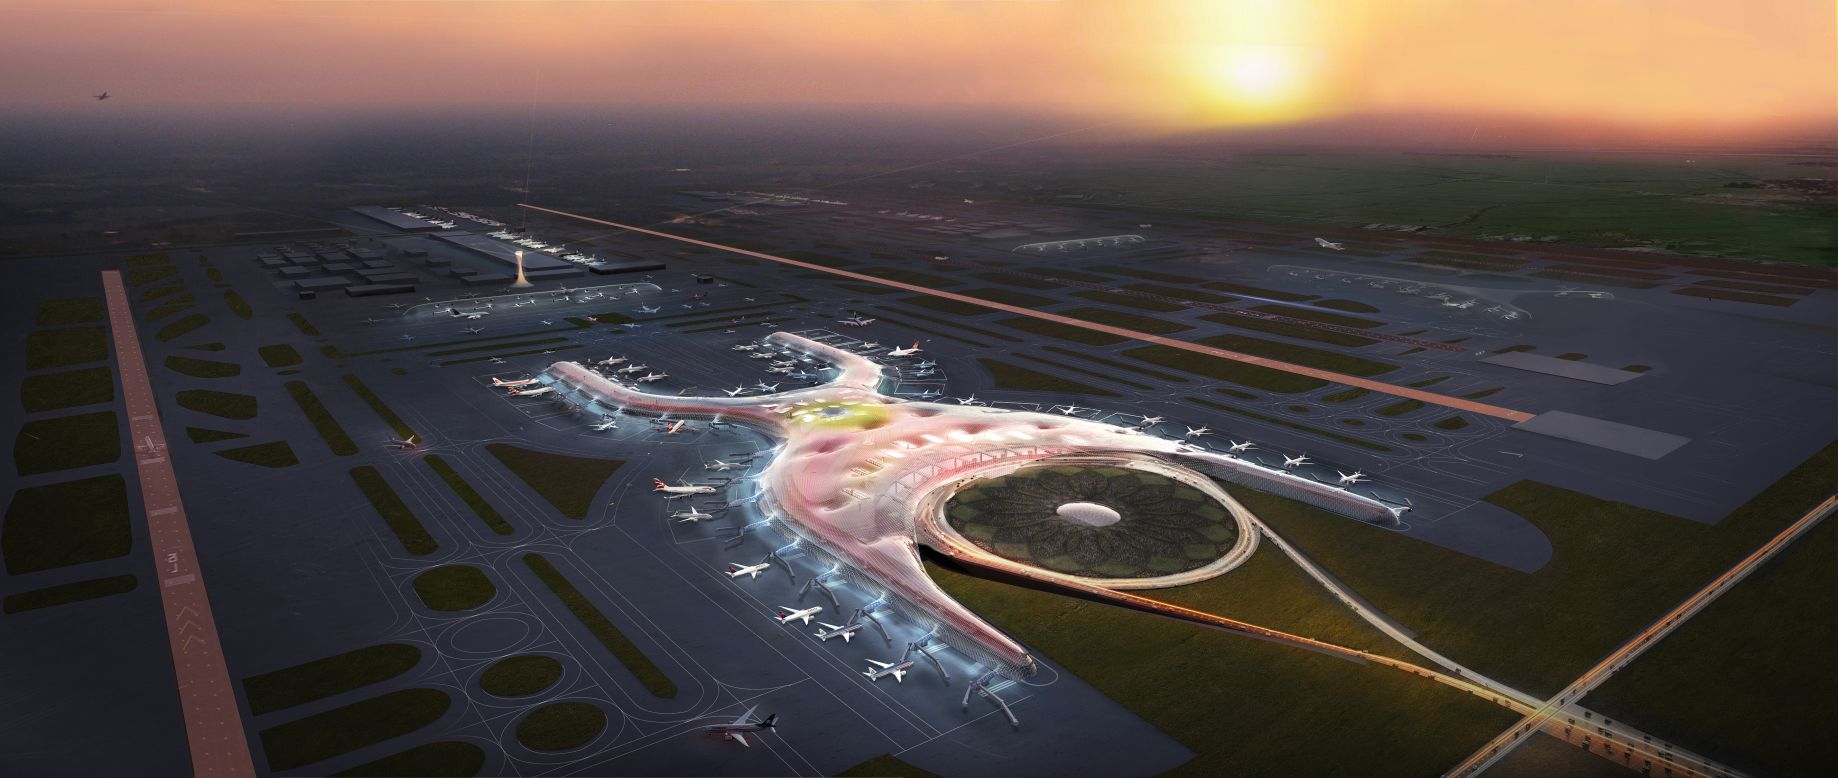 This year will see construction begin on the new <a href="http://www.fosterandpartners.com/news/archive/2014/09/httpwwwfosterandpartnerscomnewsarchive201409foster-and-partners-to-design-new-international-airport-for-mexico-city/" target="_blank" target="_blank">Mexico City International Airport</a>, boasting to be the "most sustainable airport in the world." The airport will have just one terminal, measuring 470,000-square-meters, which will eventually serve six runways.<br /><br />[Artist's rendering.]